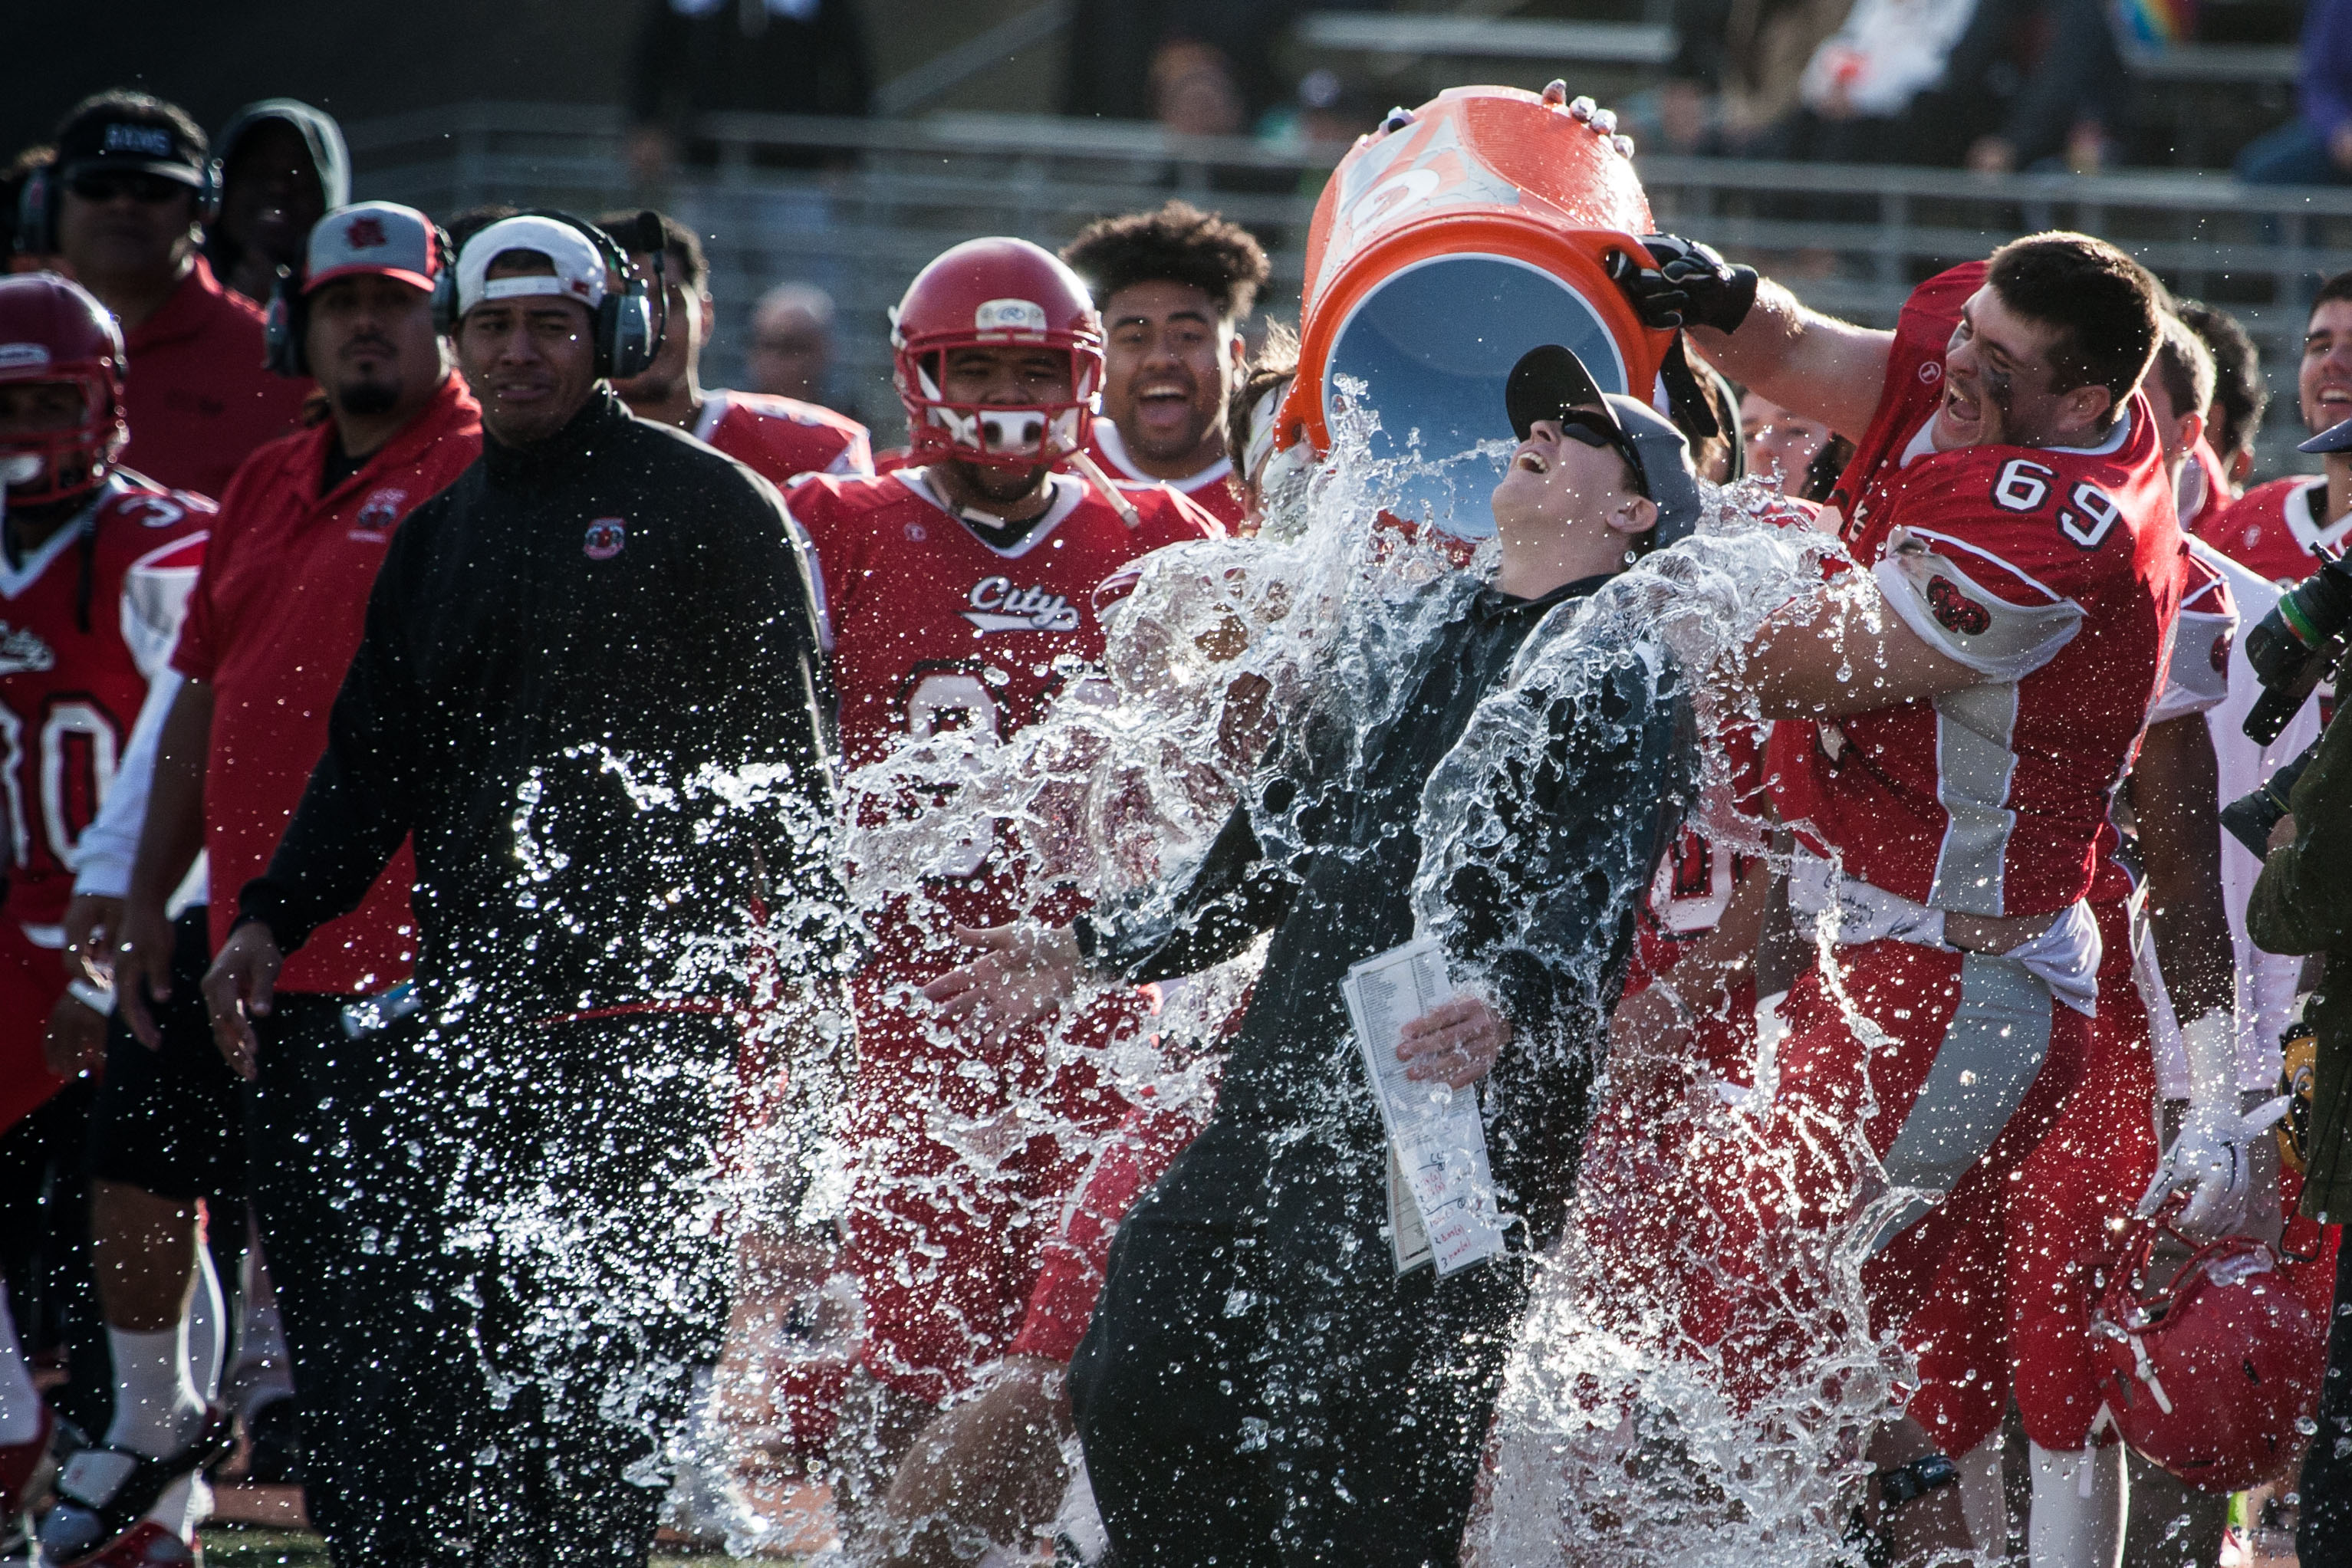 City College players dump a cooler of water over head coach Jimmy Collins to celebrate winning the California State Athletic Conference against Saddleback College at Rush Stadium on Saturday, Dec. 12, 2015 in San Francisco. (Photo by Khaled Sayed/The Guardsman)